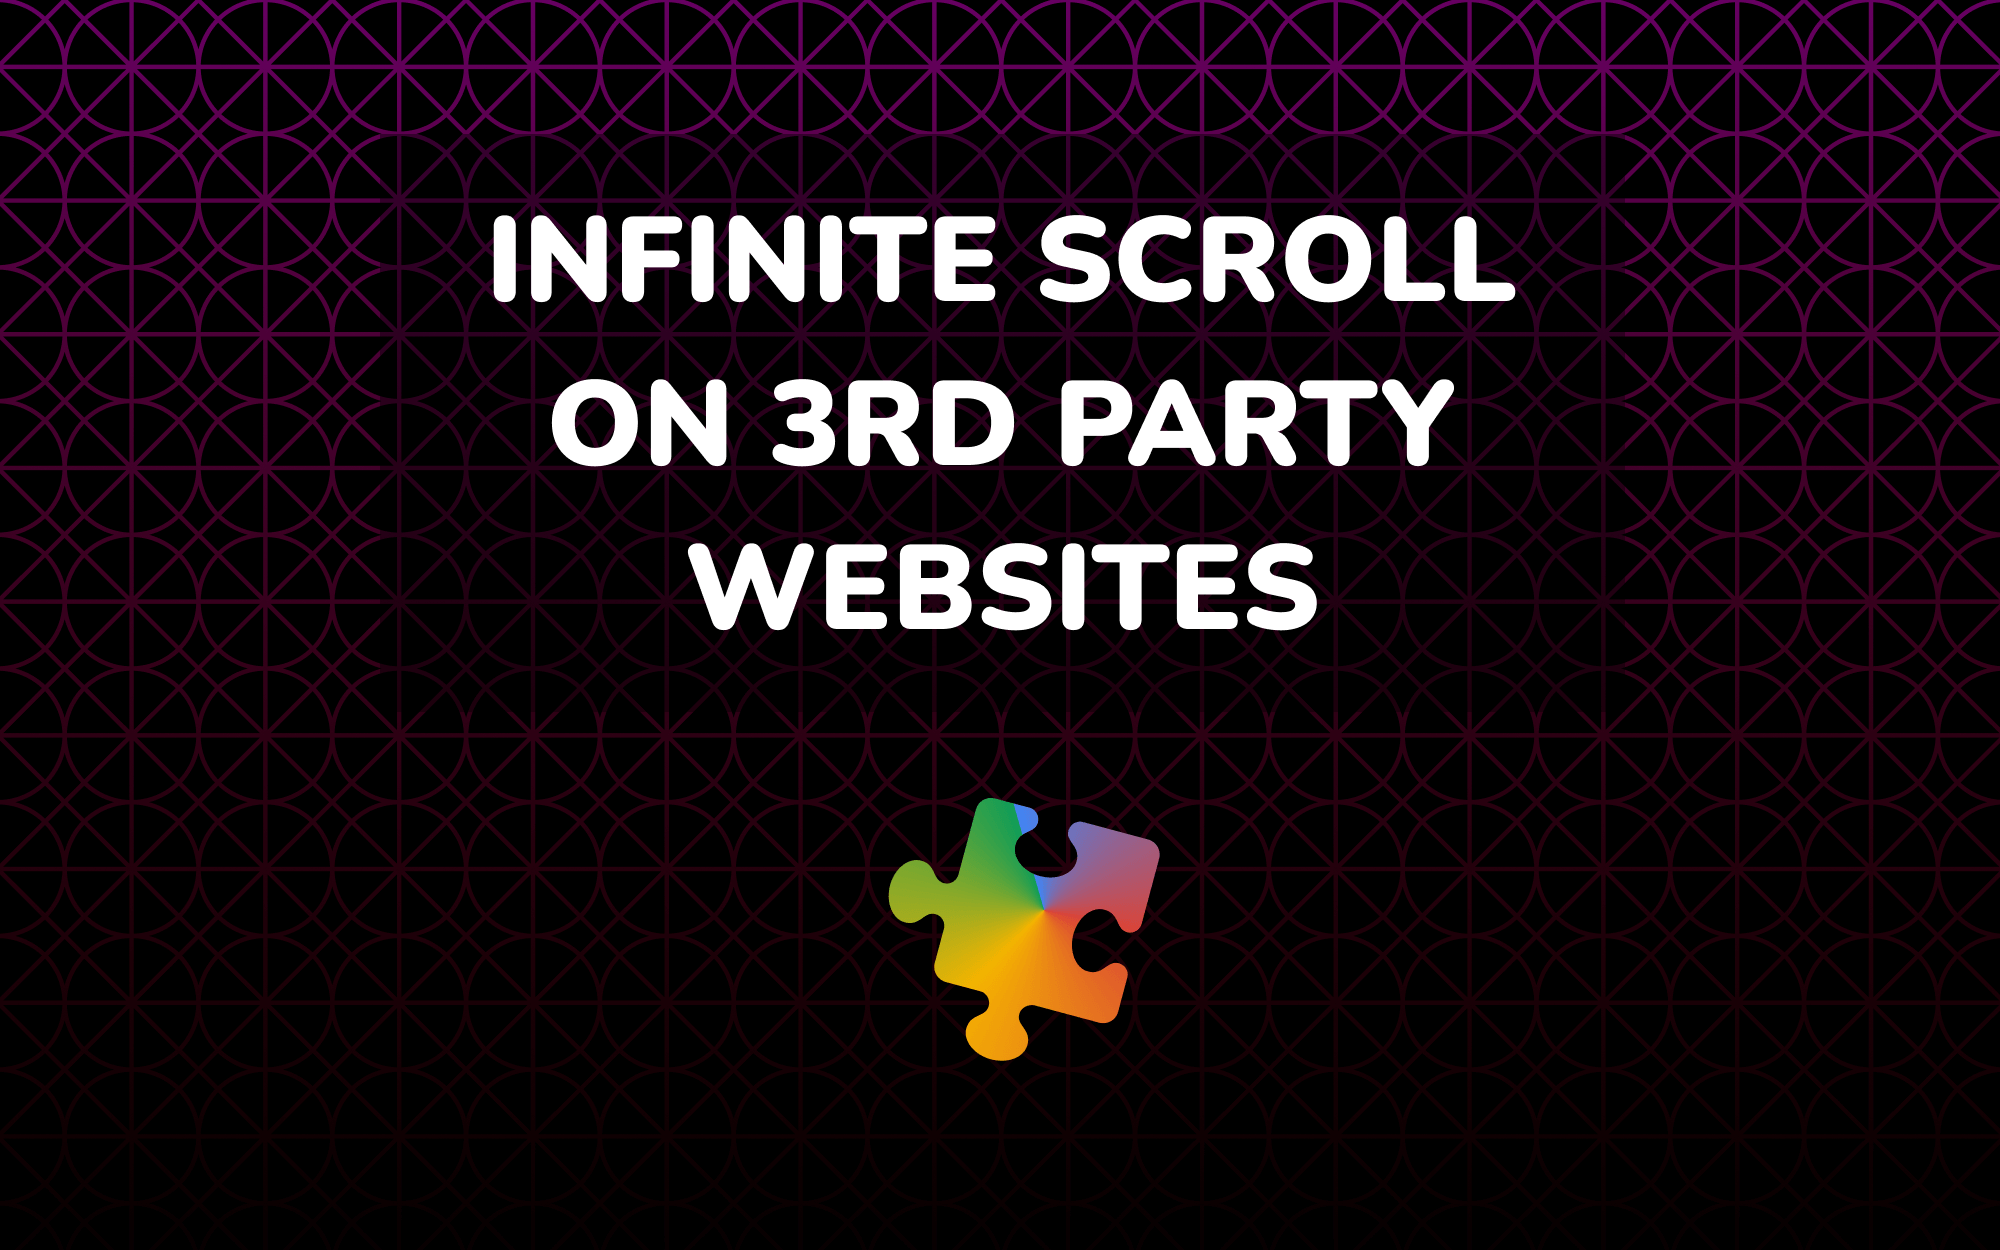 Infinite Scrolling for a Third Party Website Using Intersection Observer API